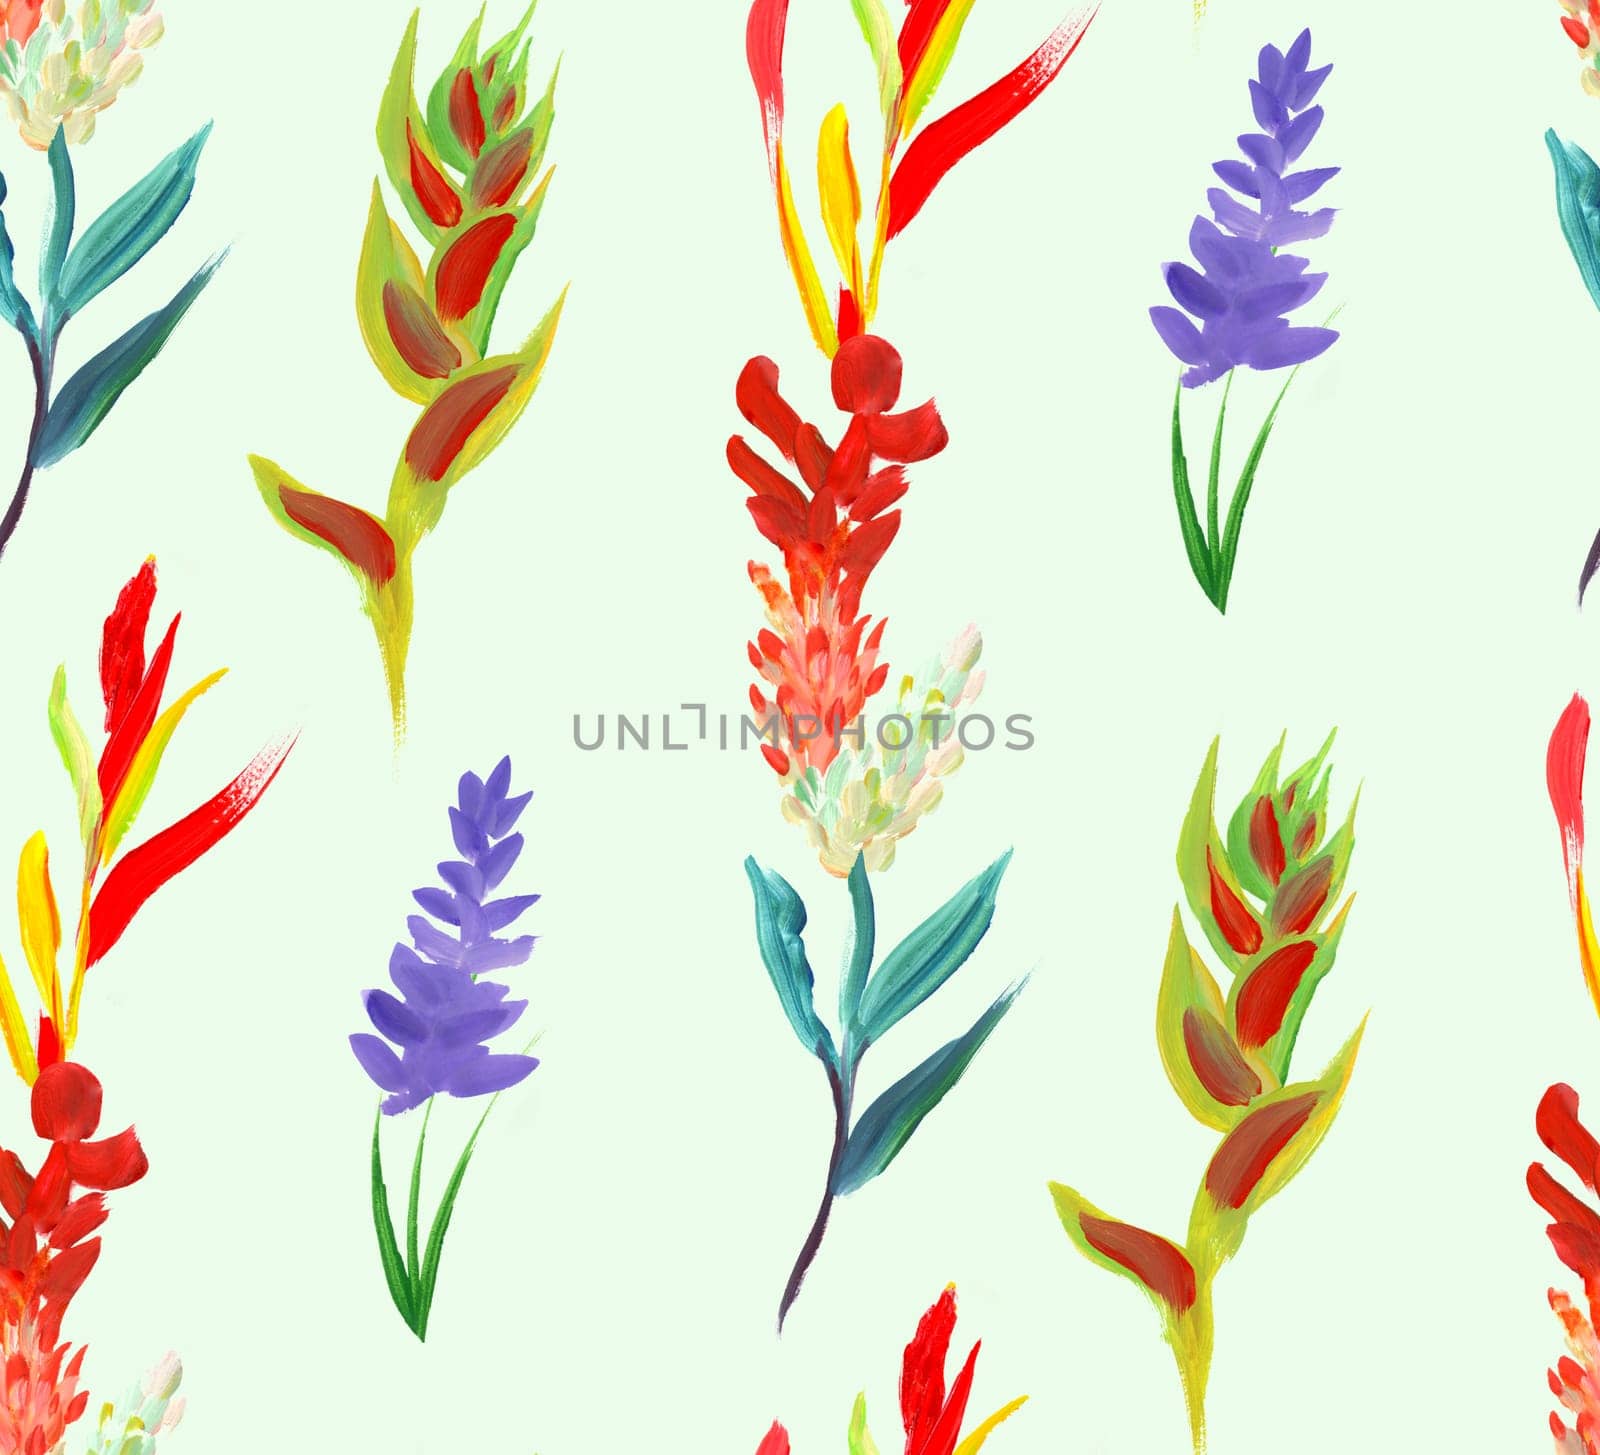 Seamless pattern with bright red tropical flowers and plants for summer textiles and surface design